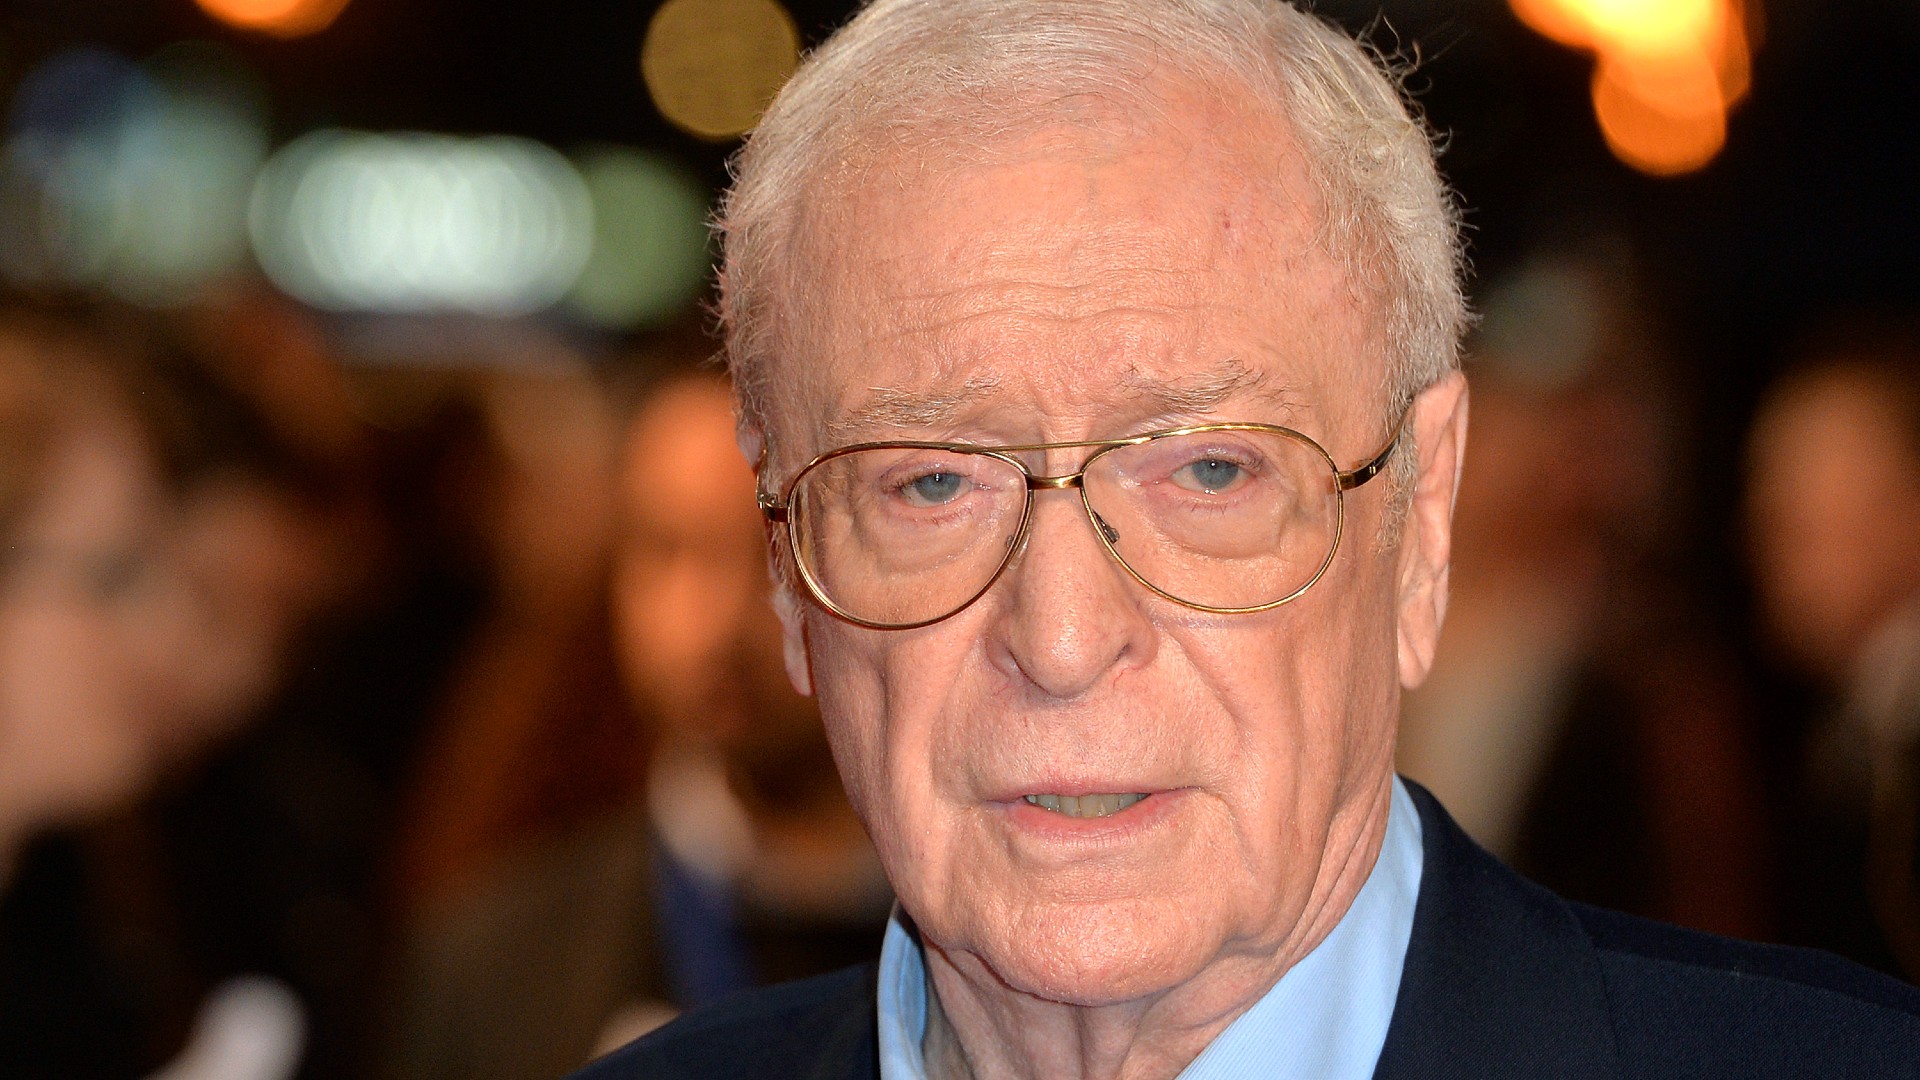 Sir Michael Caine Announces Auction of Some 'Treasured Possessions' as He and Wife Downsize